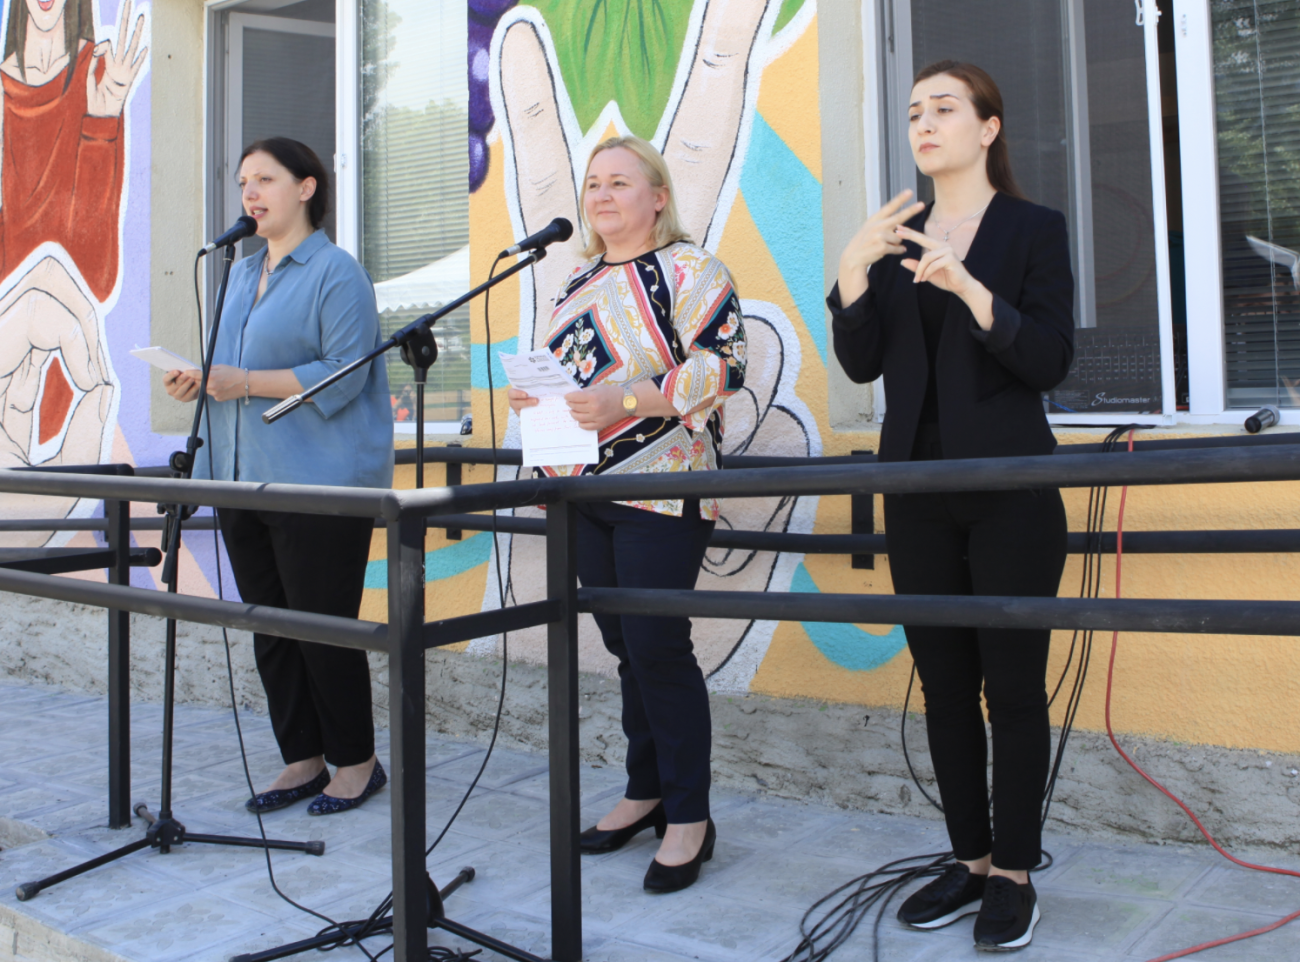 Three women stand in front of a building decorated with many colors. A woman, dressed in black, on the end is translating the speech to sign language.